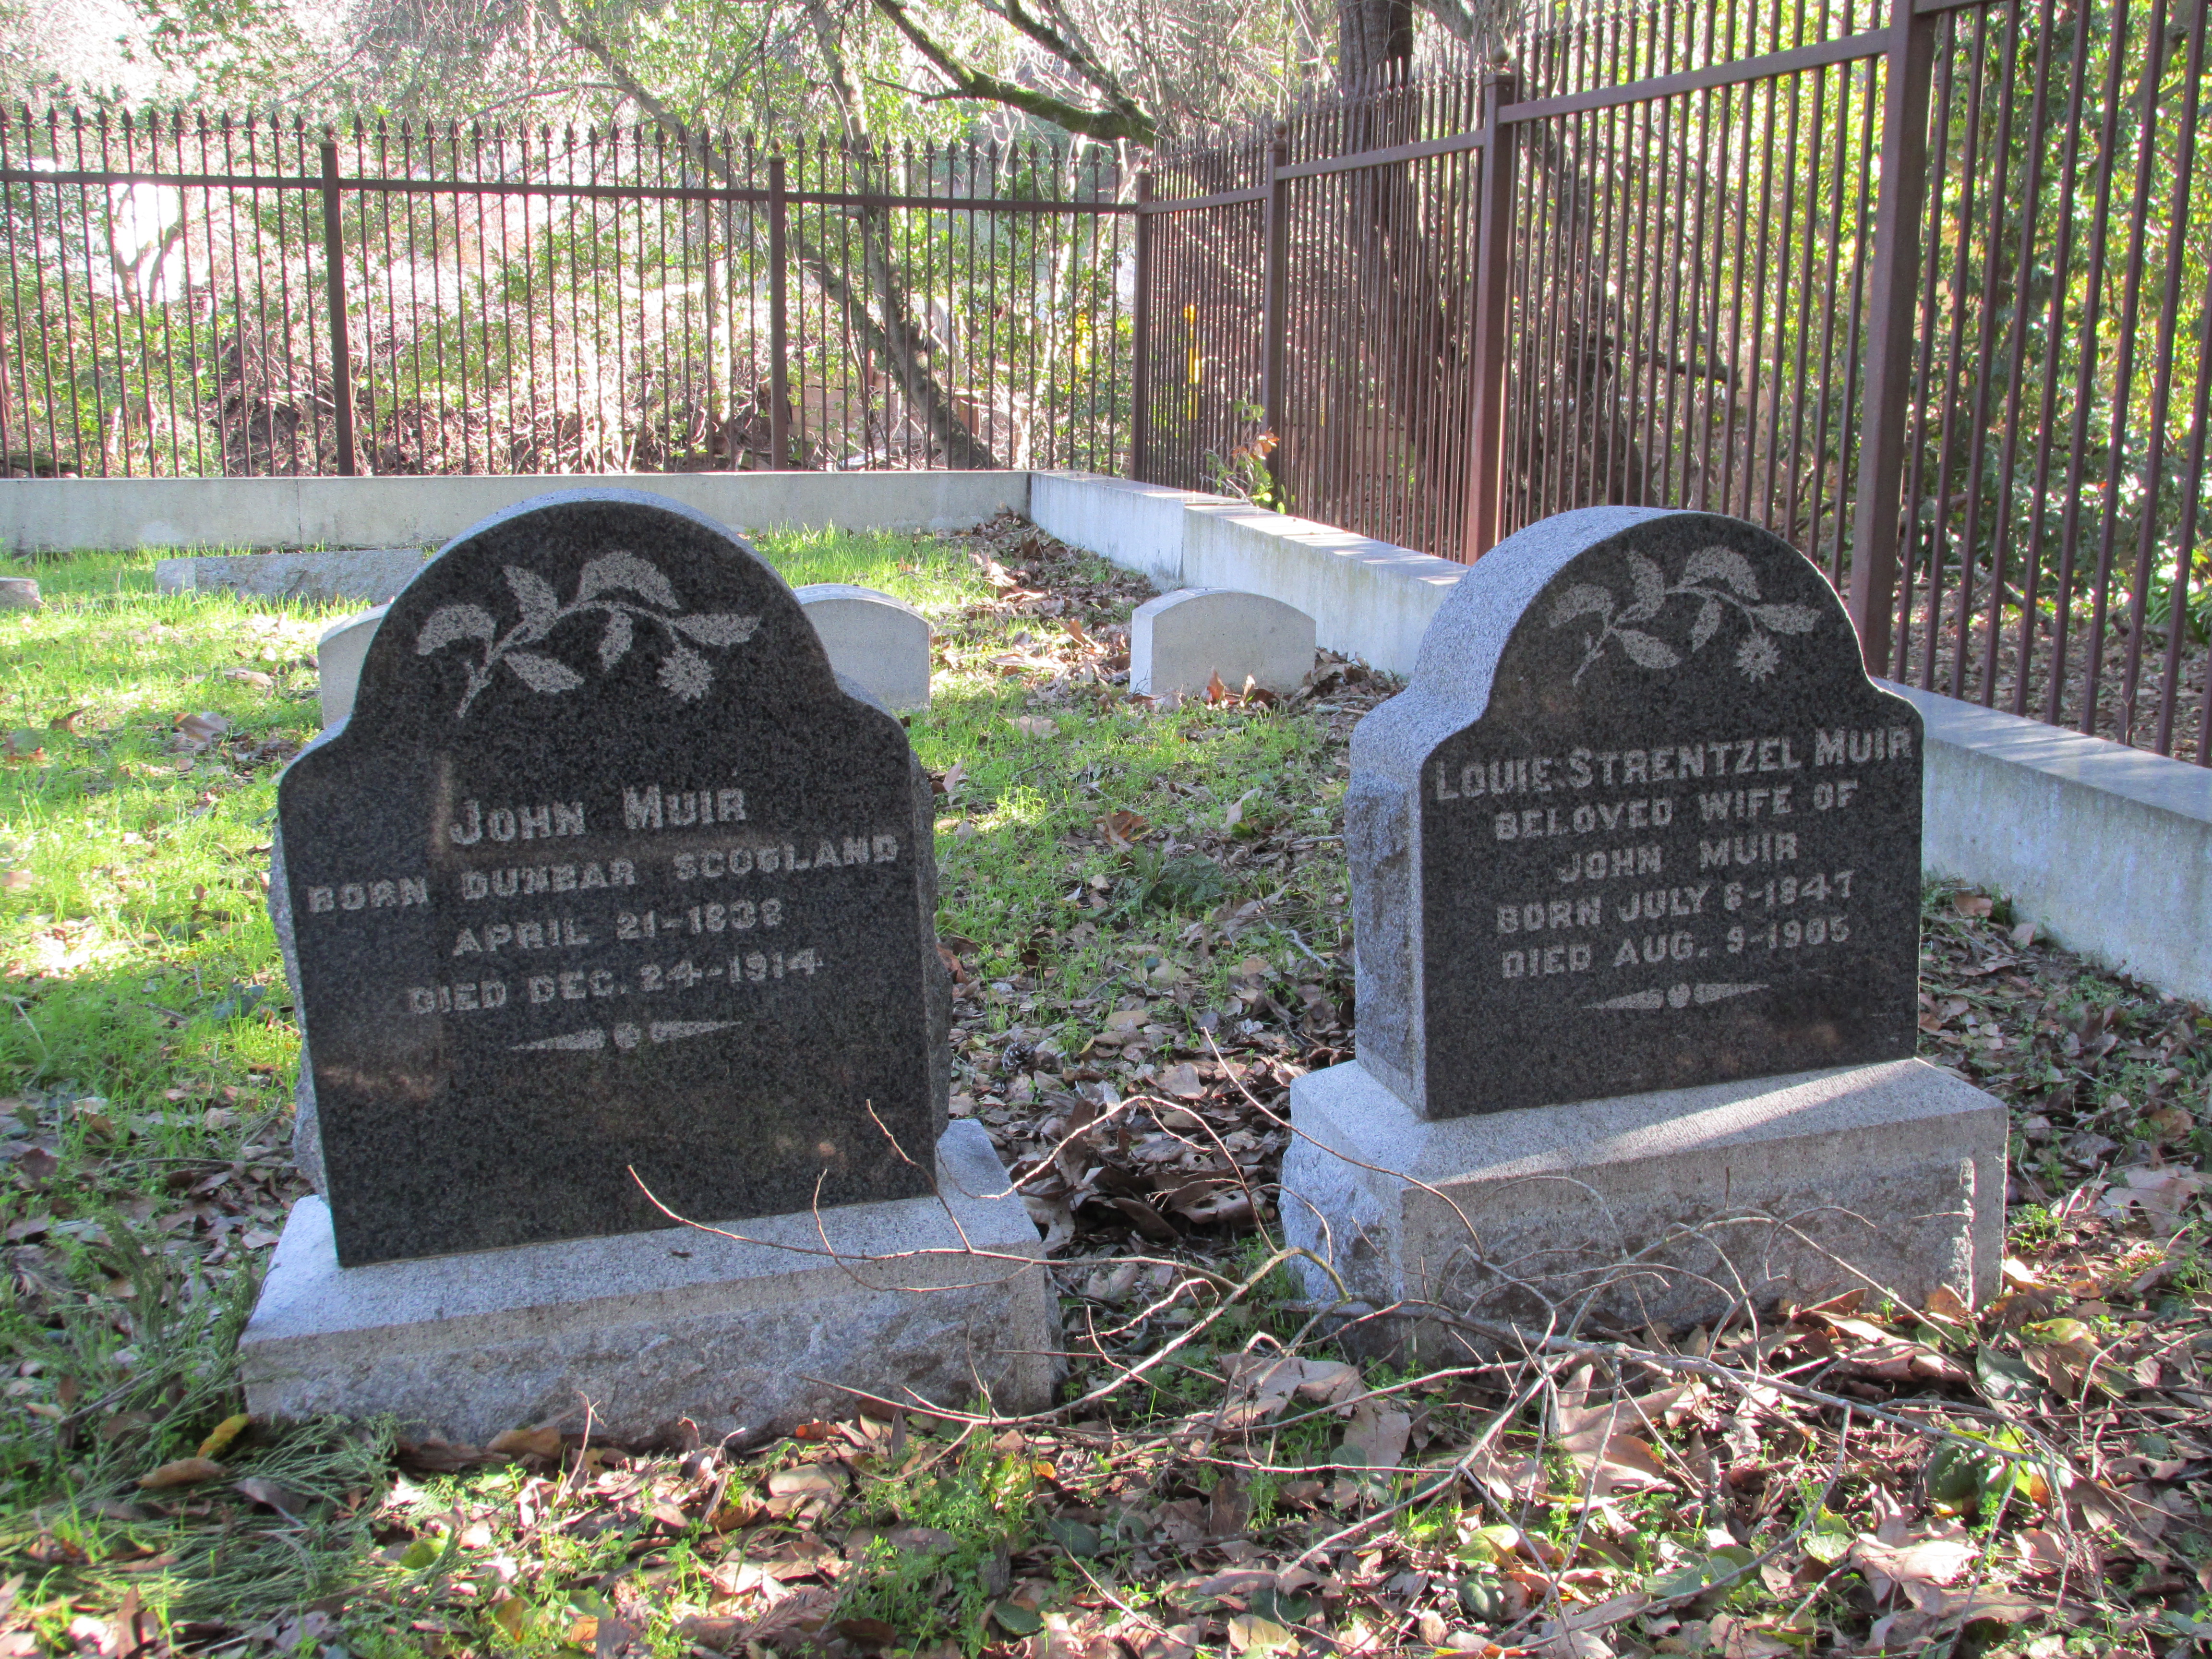 The tombstones of John and Louie Muir. (Ortega-Welch/KQED)